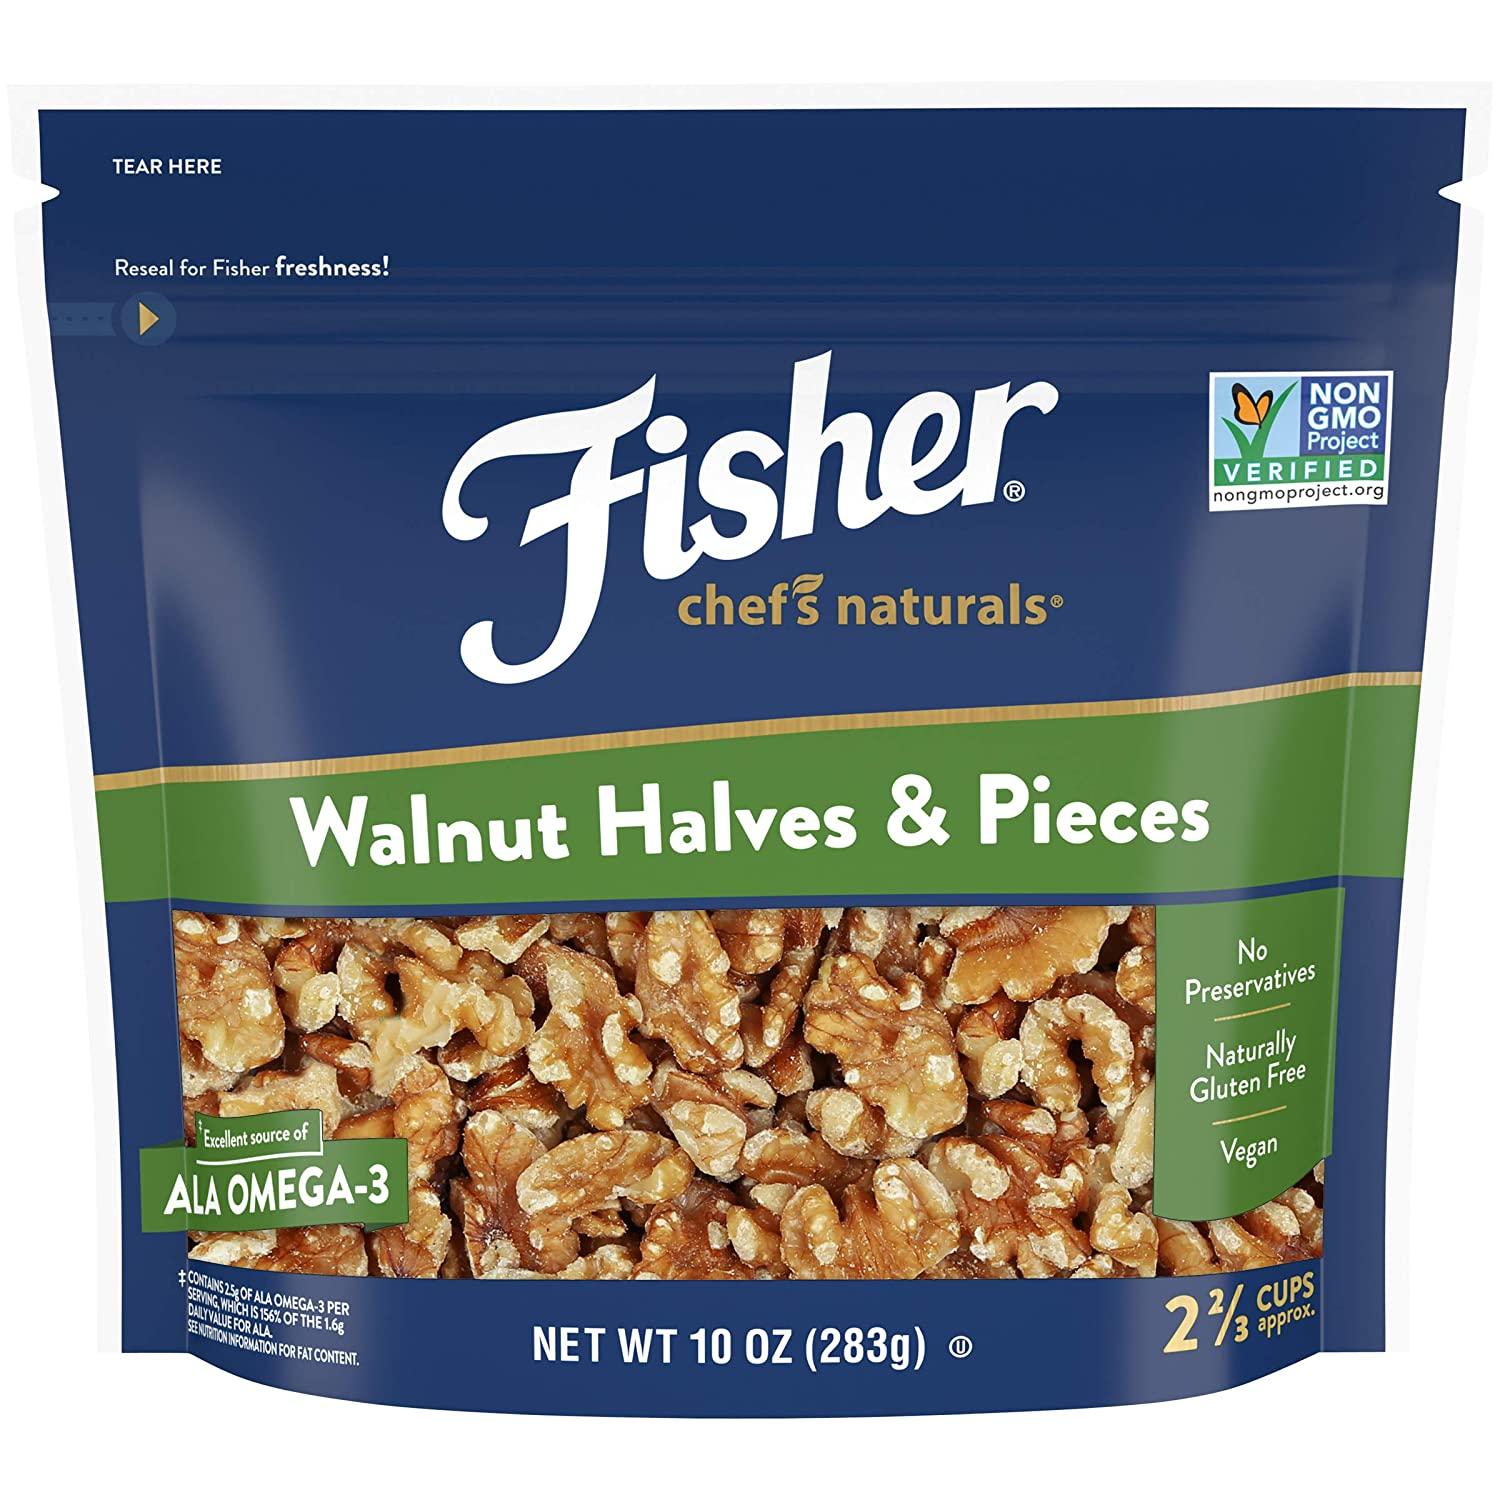 Fisher Walnut Halves and Pieces for $3.59 Shipped